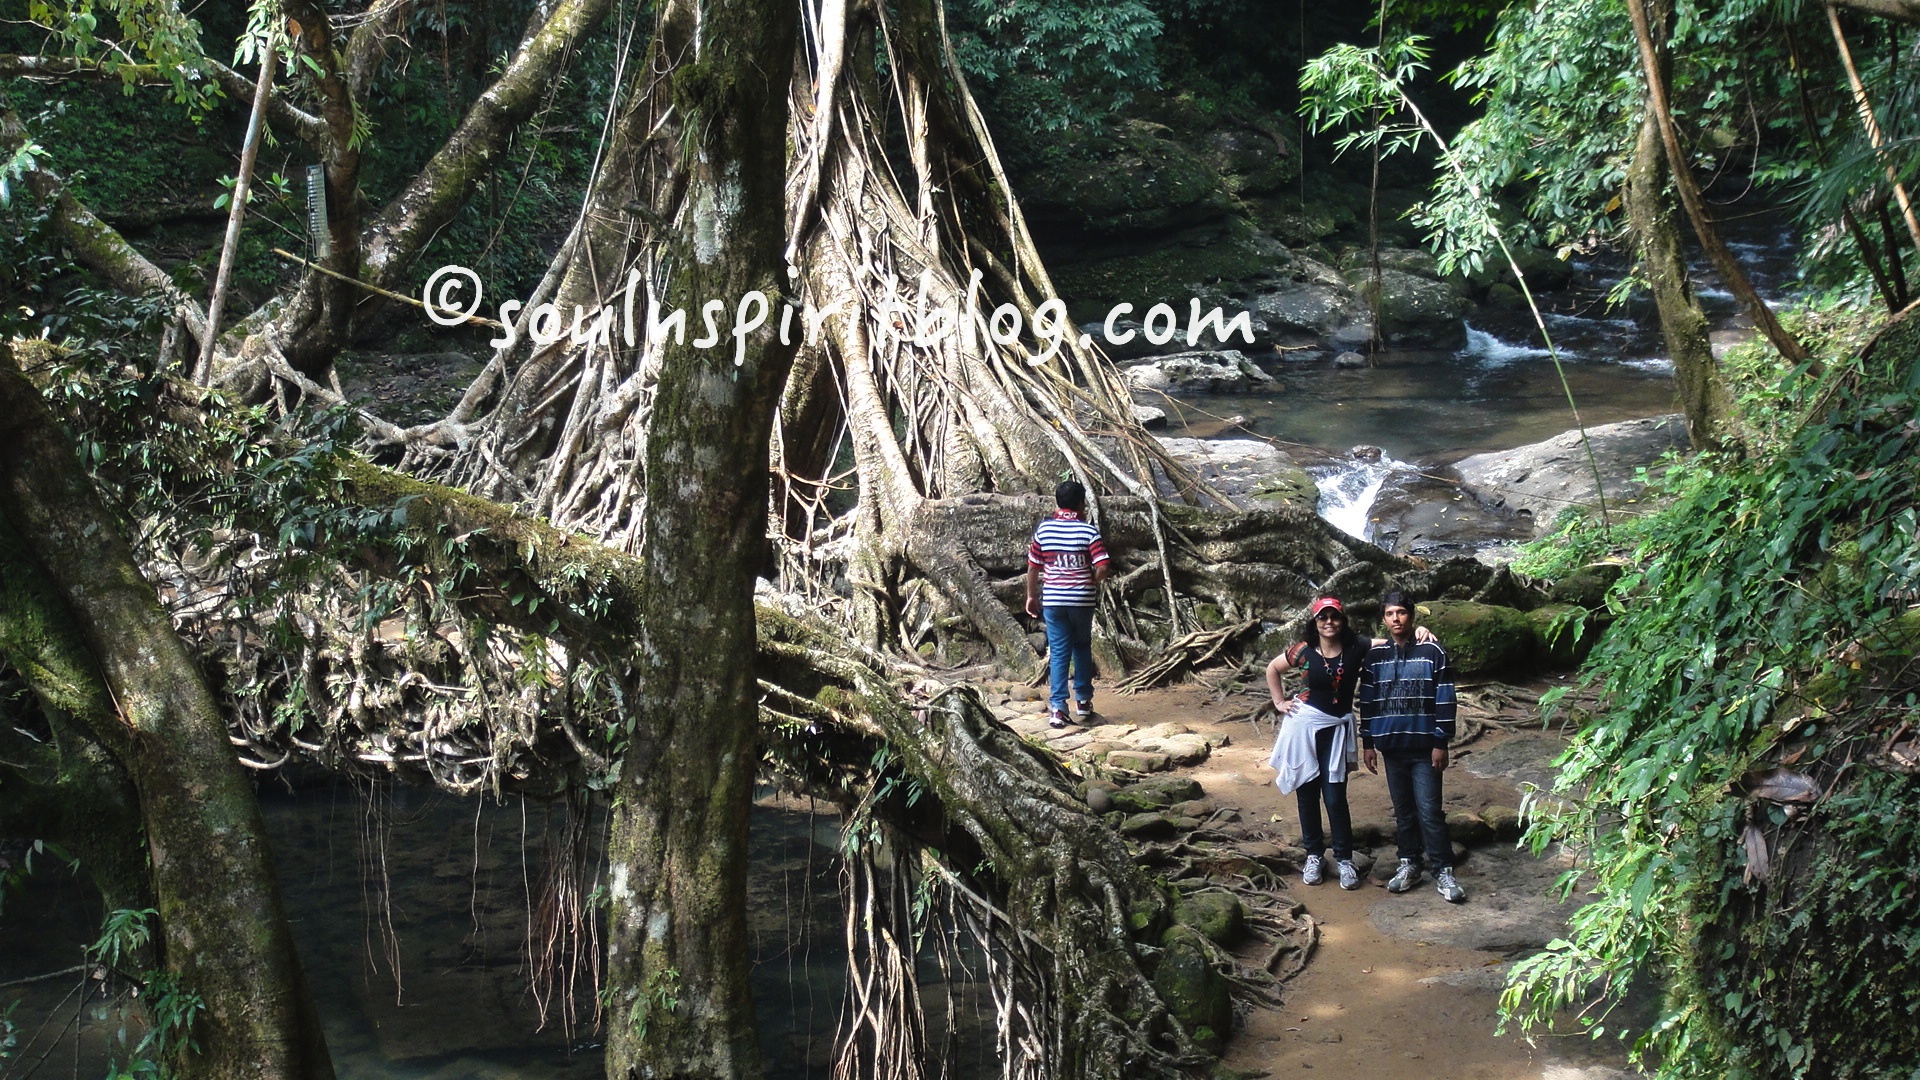 Stones and banyan tree roots provide strongest path to cross rivers and streams.